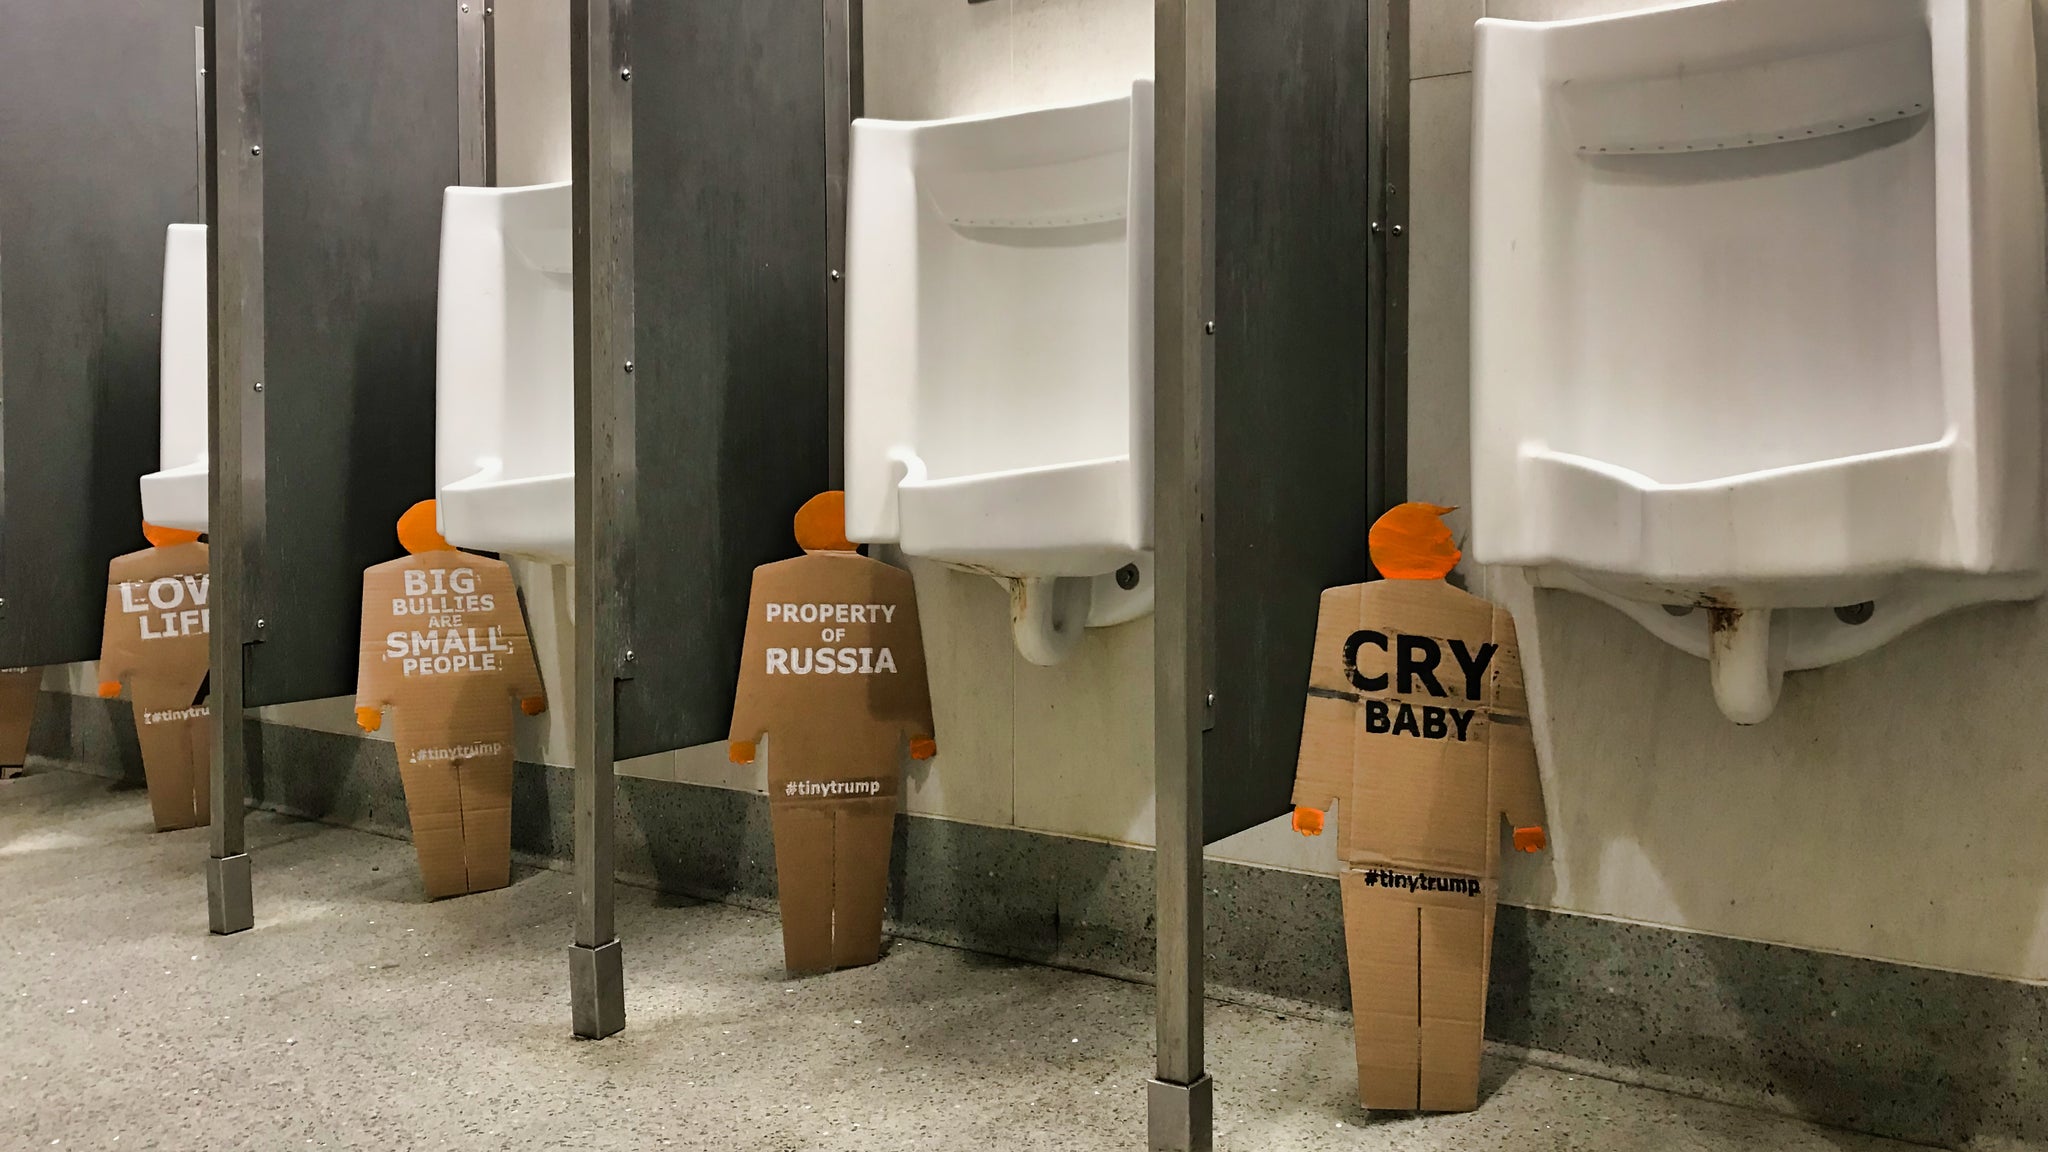 Four, two foot tall, cardboard tiny trumps, each standing next to a urinal in a row of urinals